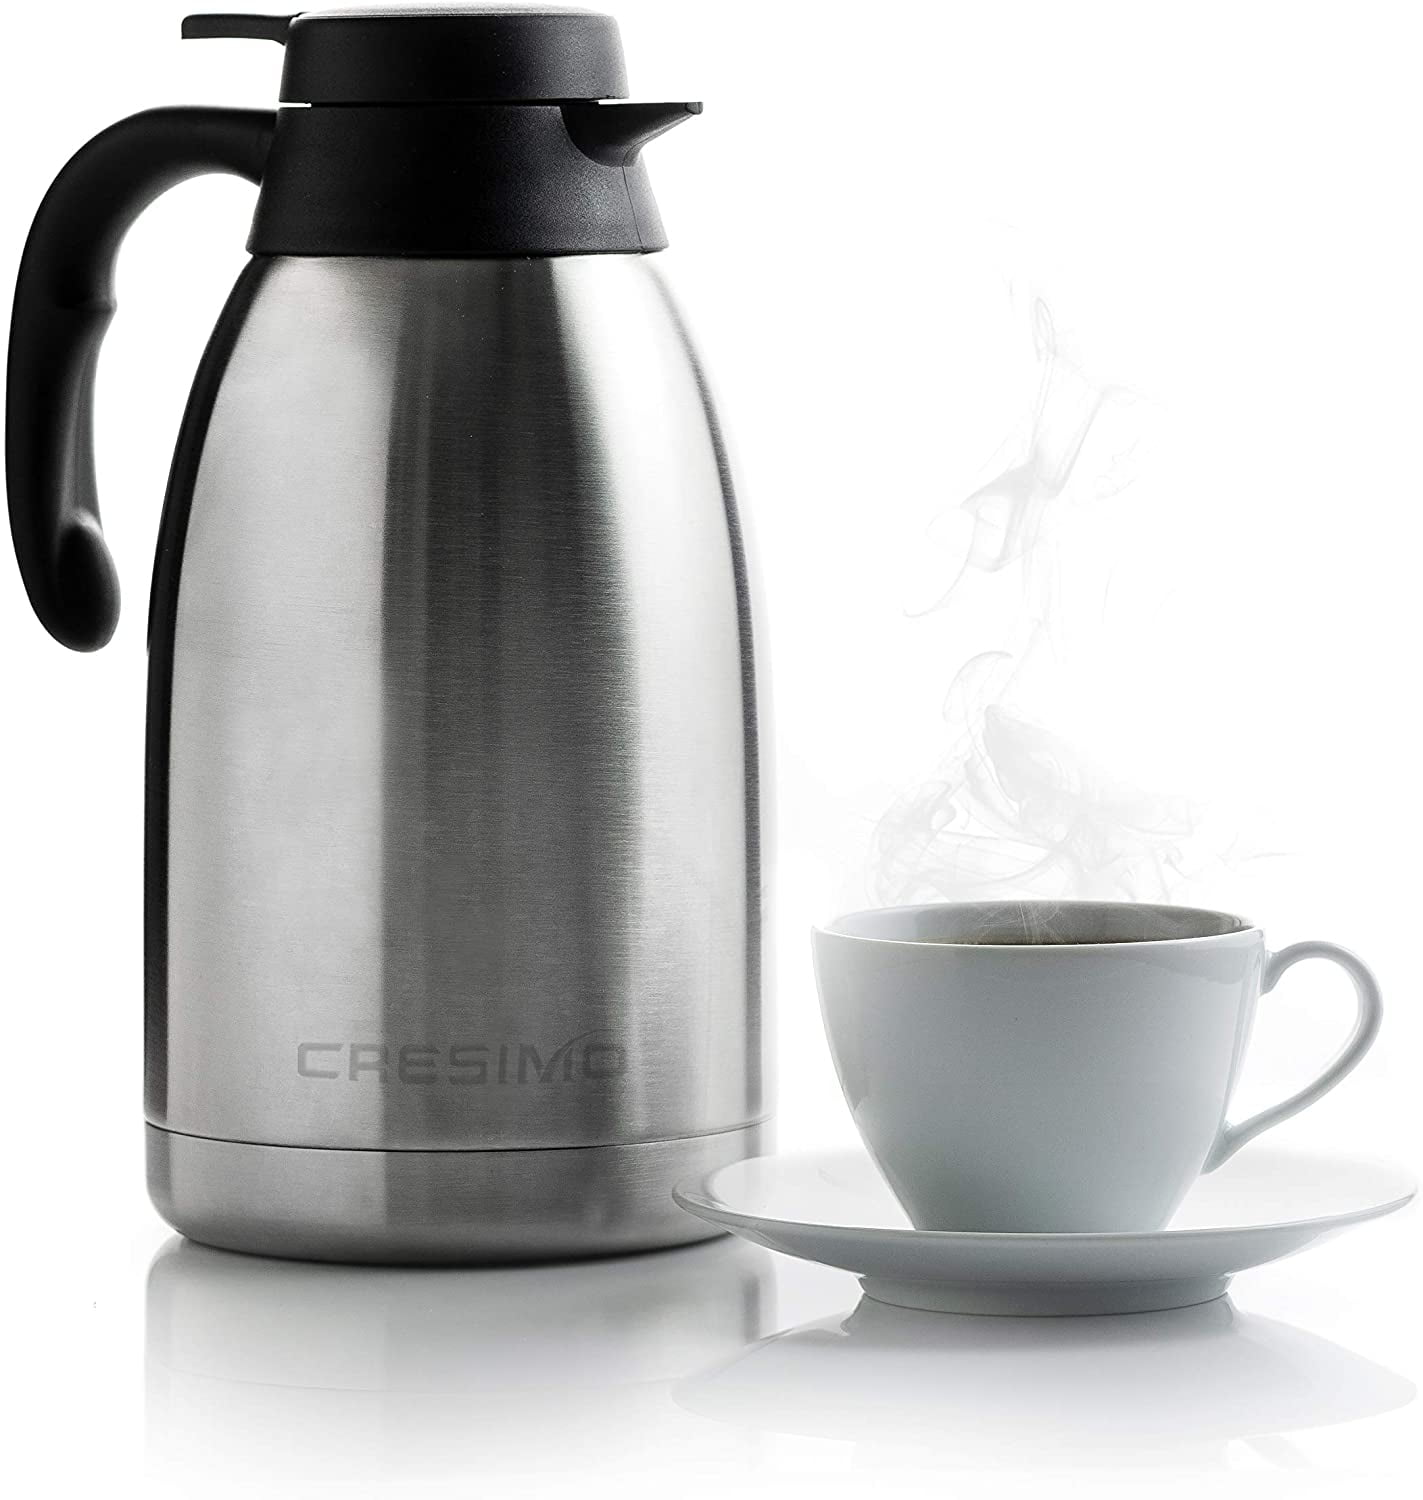 2L Stainless Steel Thermal Carafe Vacuum Insulated Double Wall Coffee Thermos 